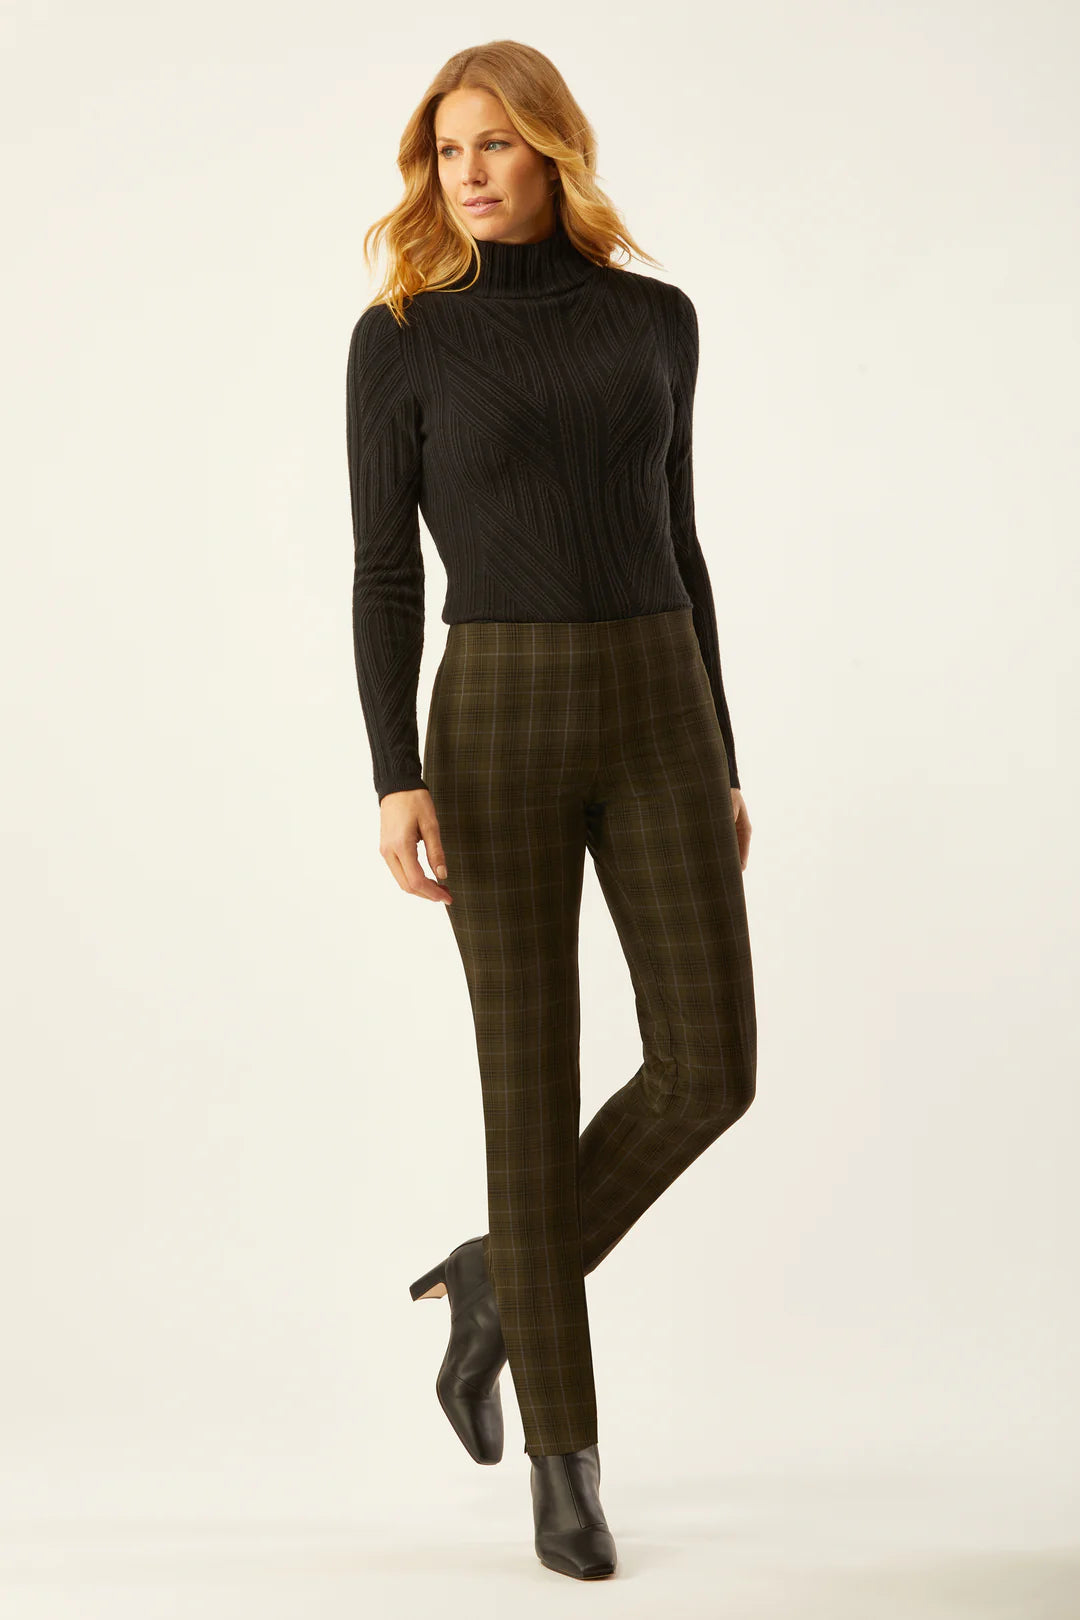 Springfield Classic Pull on Plaid Pant in olive/black by Ecru